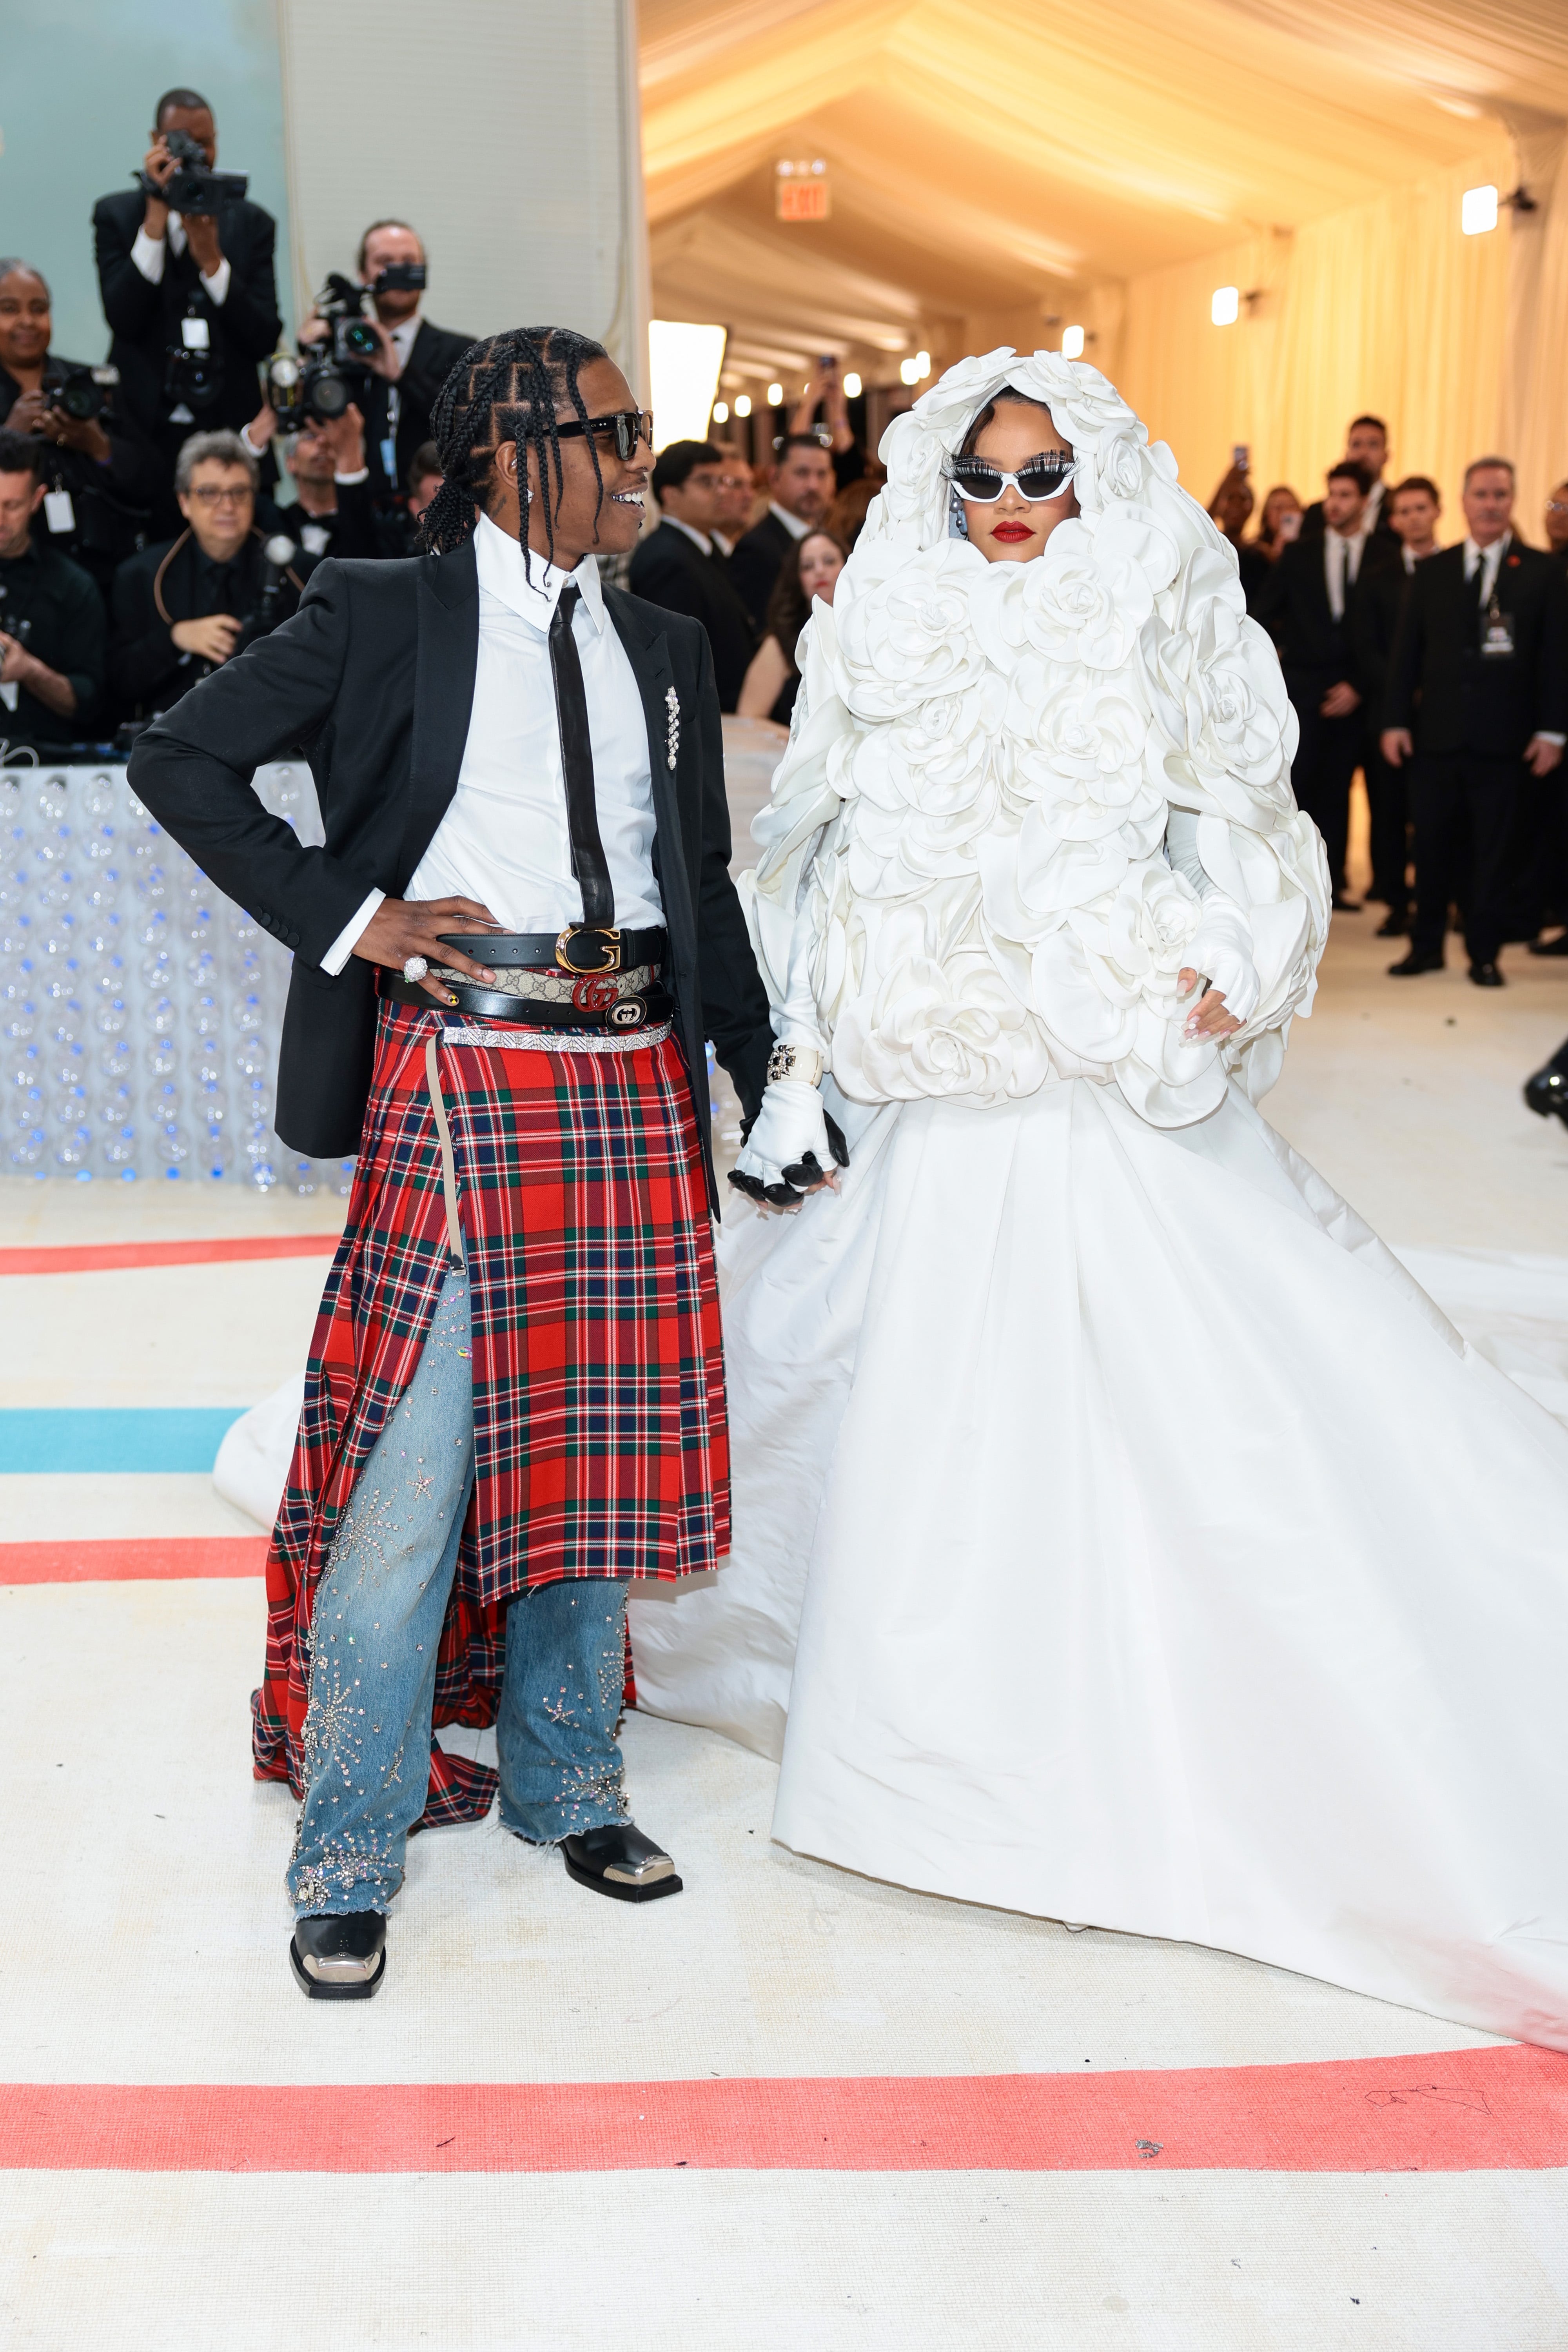 Rihanna, ASAP Rocky Met Gala 2021 Photos: Fashion, Outfit Pictures